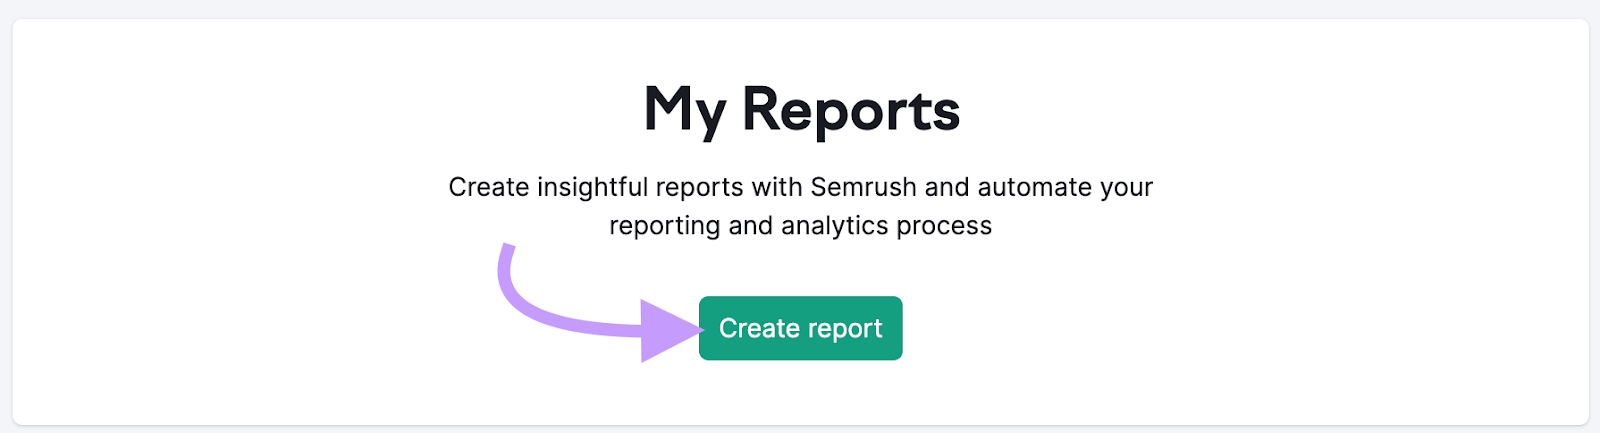 “Create report" button in My Reports tool